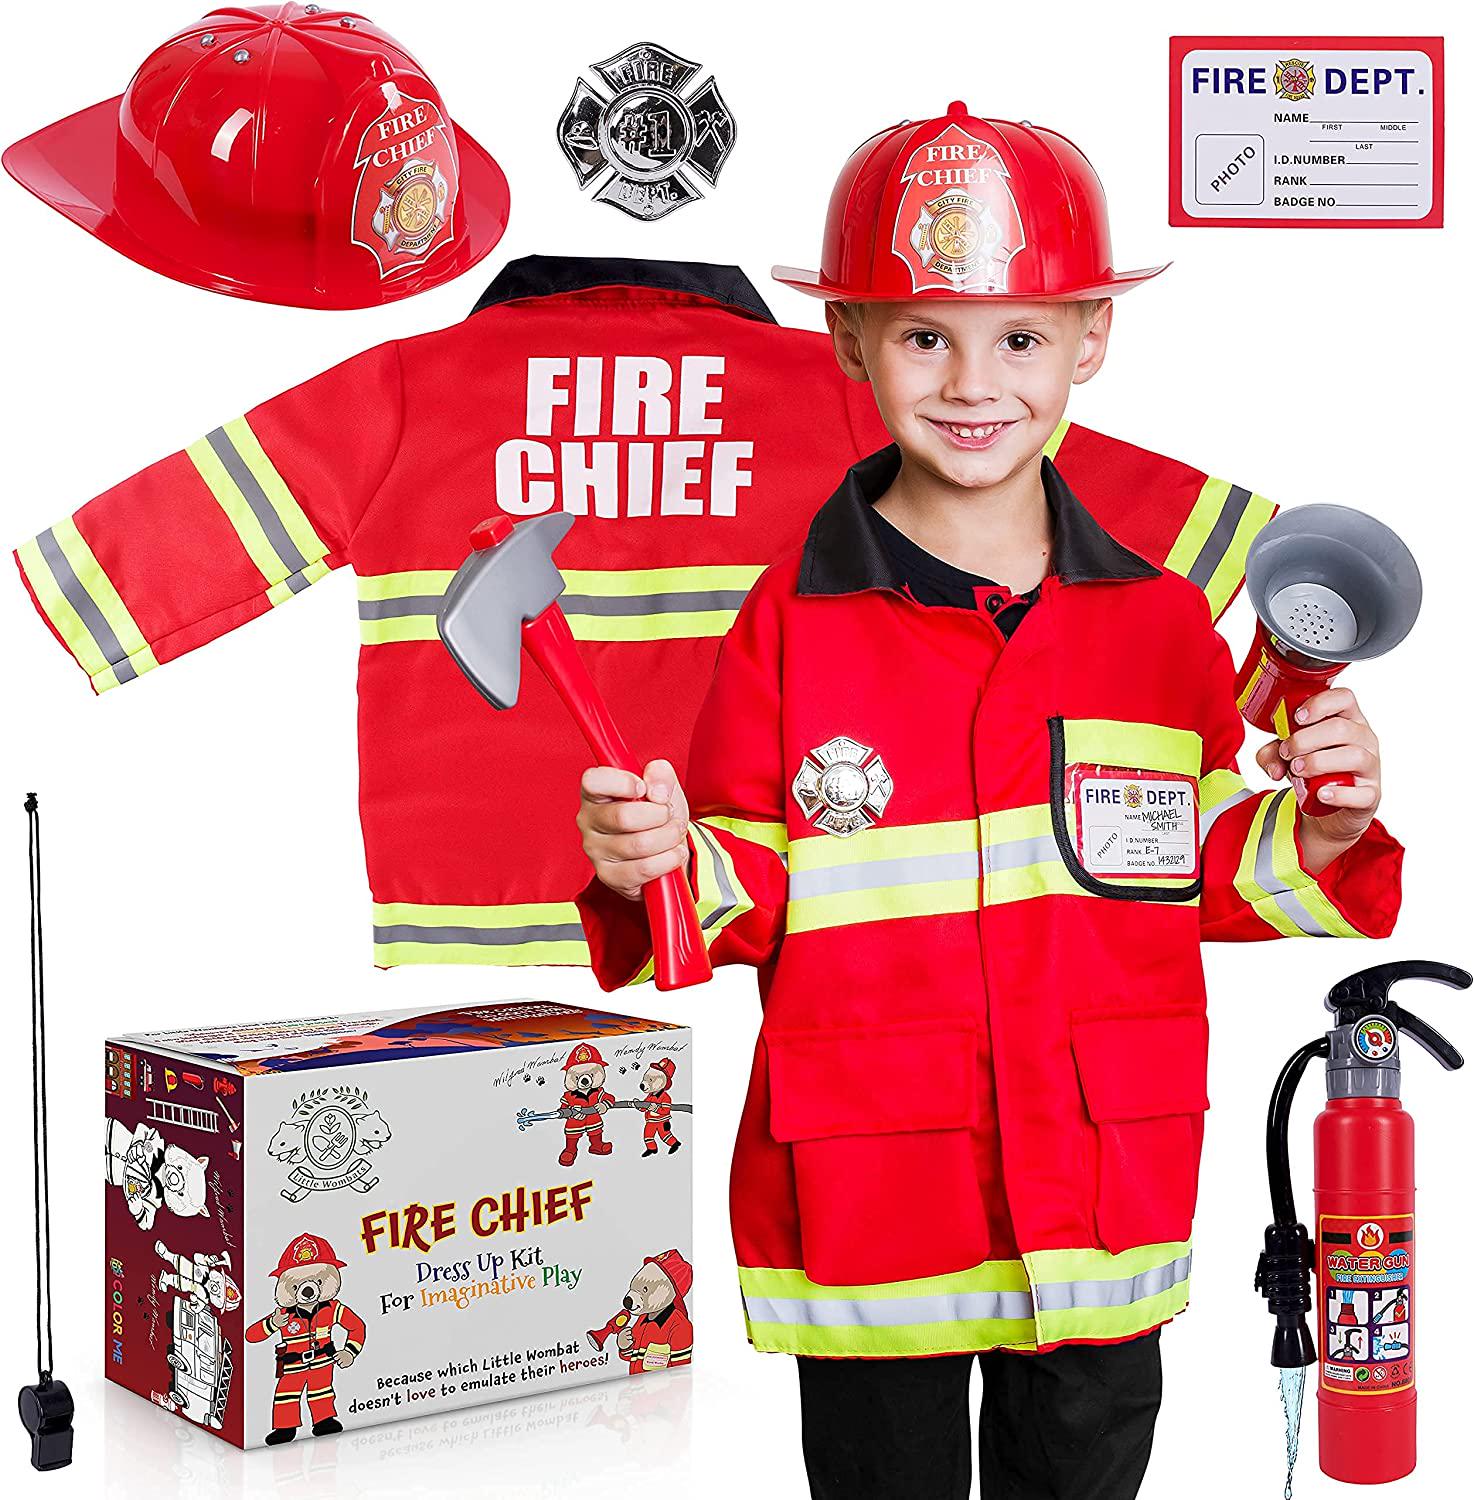 Little Wombats, Little Wombats Firefighter Costume for Kids, (10 pcs) with Jacket, Helmet, Plastic Axe, Extinguisher, Megaphone, Ages 3 to 7 - Fire Chief Outfit with Fireman Toys - Halloween Costumes for Boys, Girls